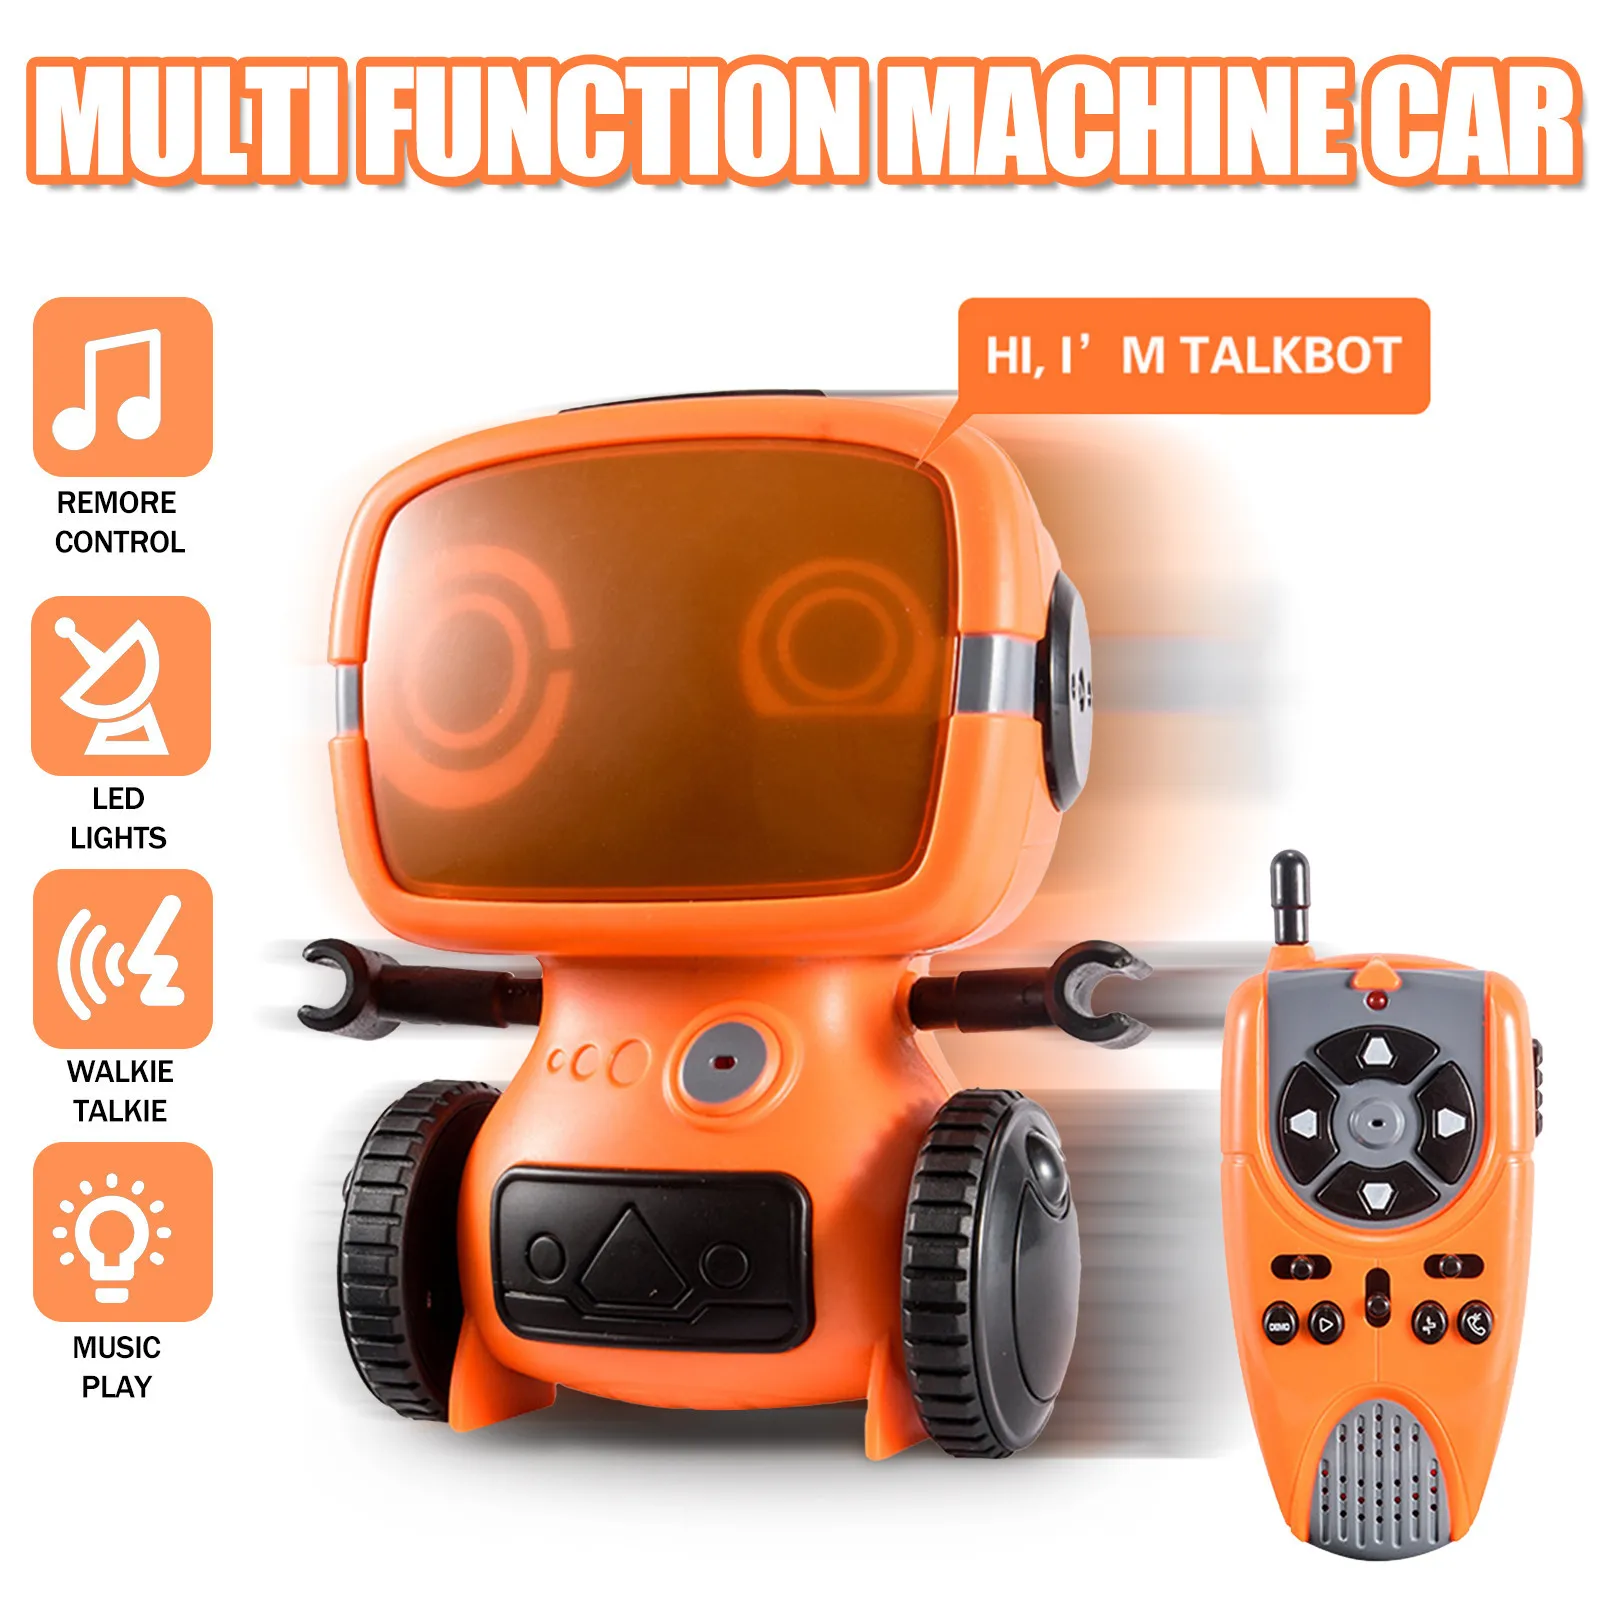 

Interactive Rc Robot Walking Talking Dancing Interactive Toy Remote Control Programmable Robot Smart Robotic For Kids